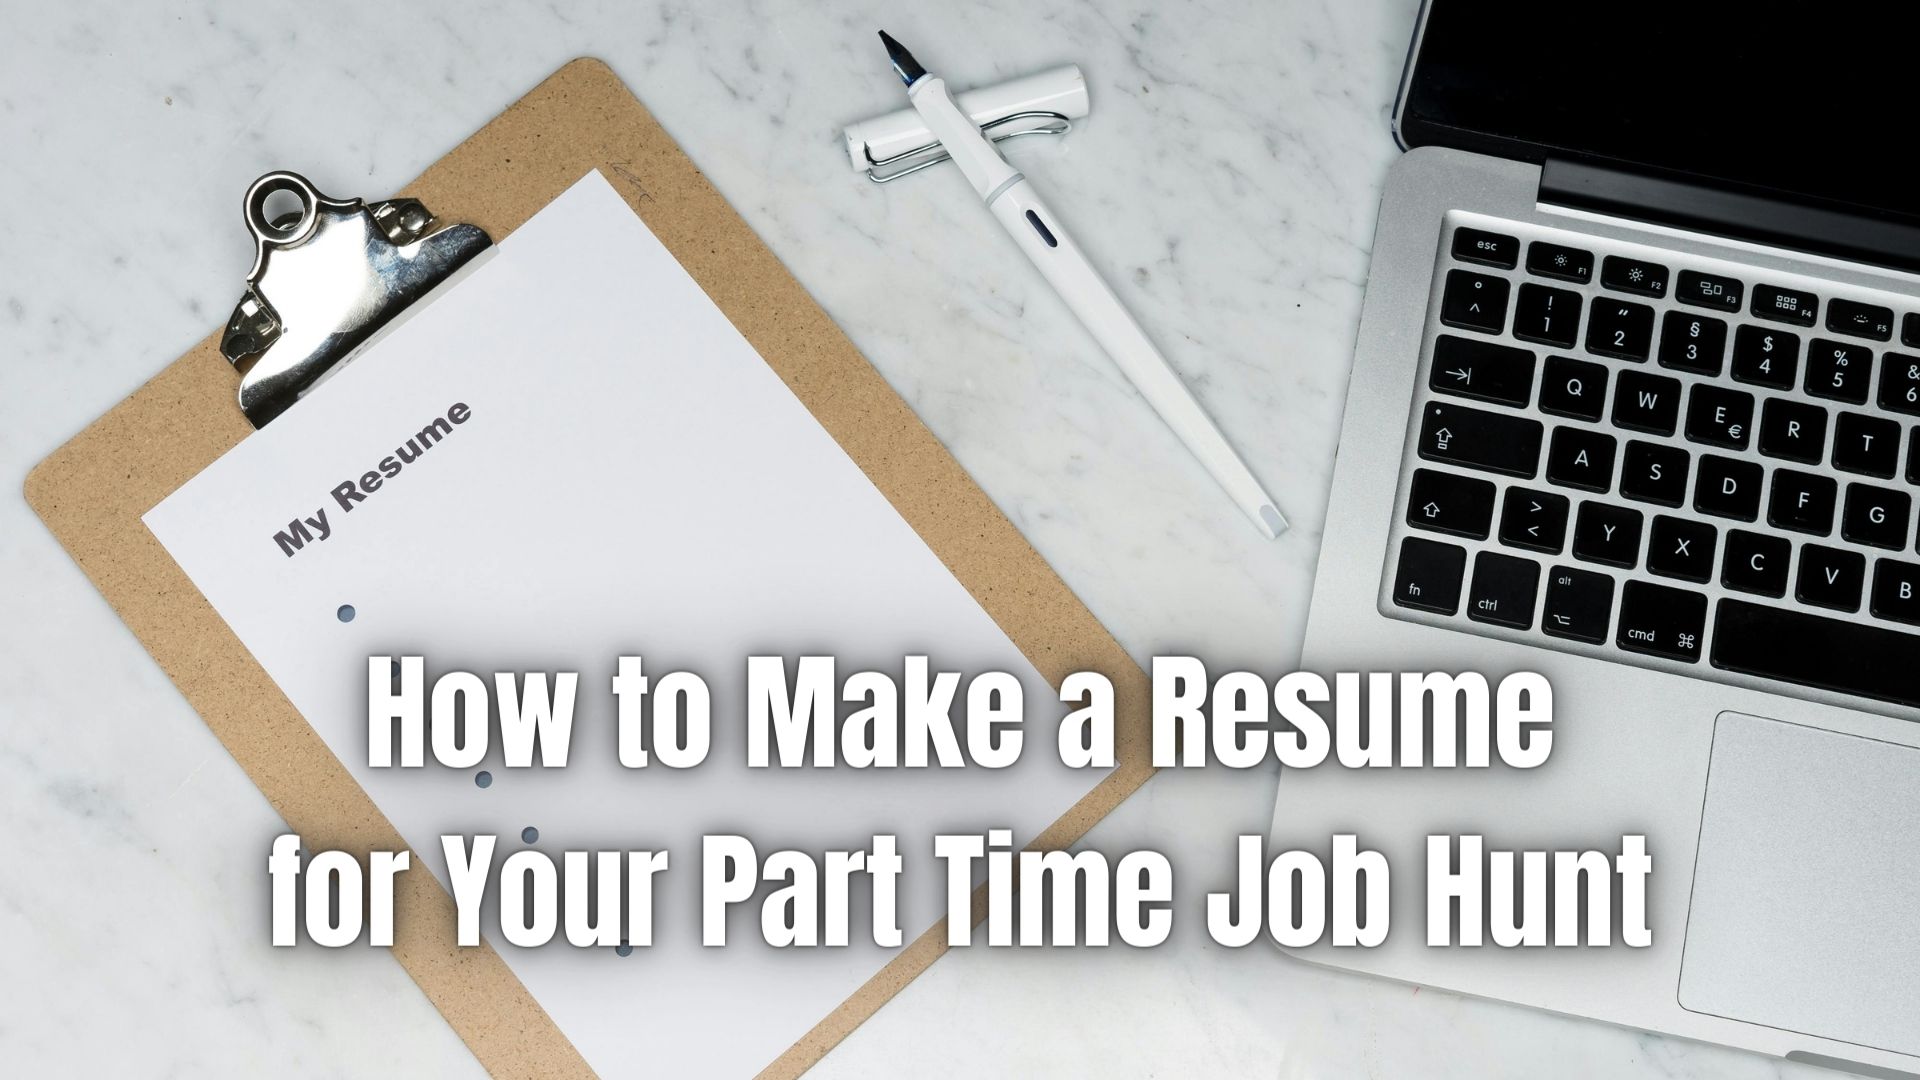 Master how to write a resume for part-time jobs with essential tips and formatting advice. Impress employers and boost your job hunt today!